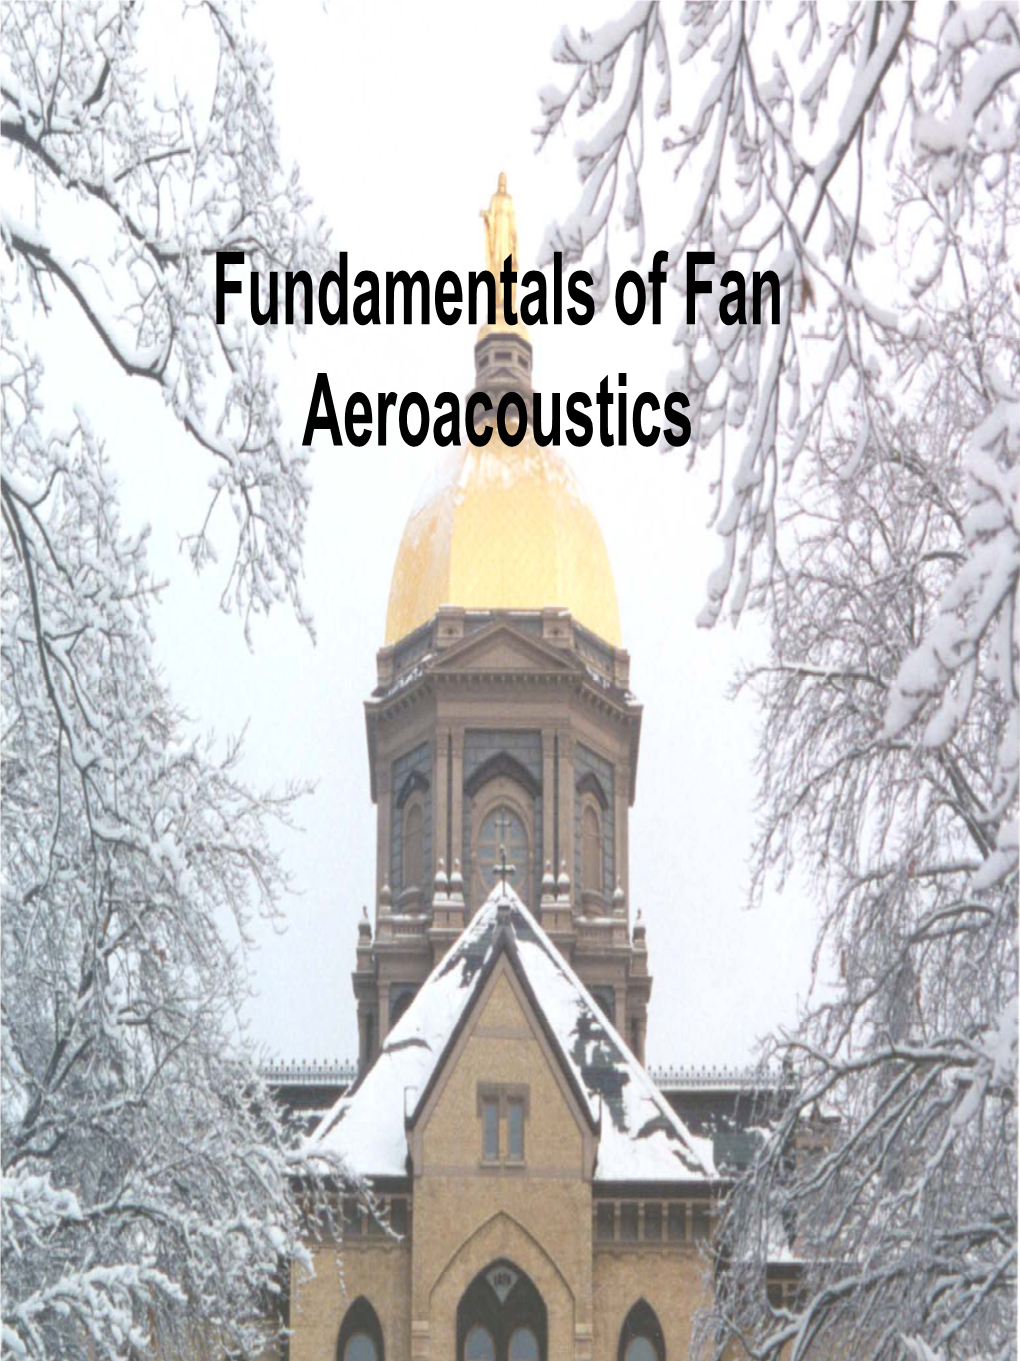 Fundamentals of Fan Aeroacoustics Overview of Lecture